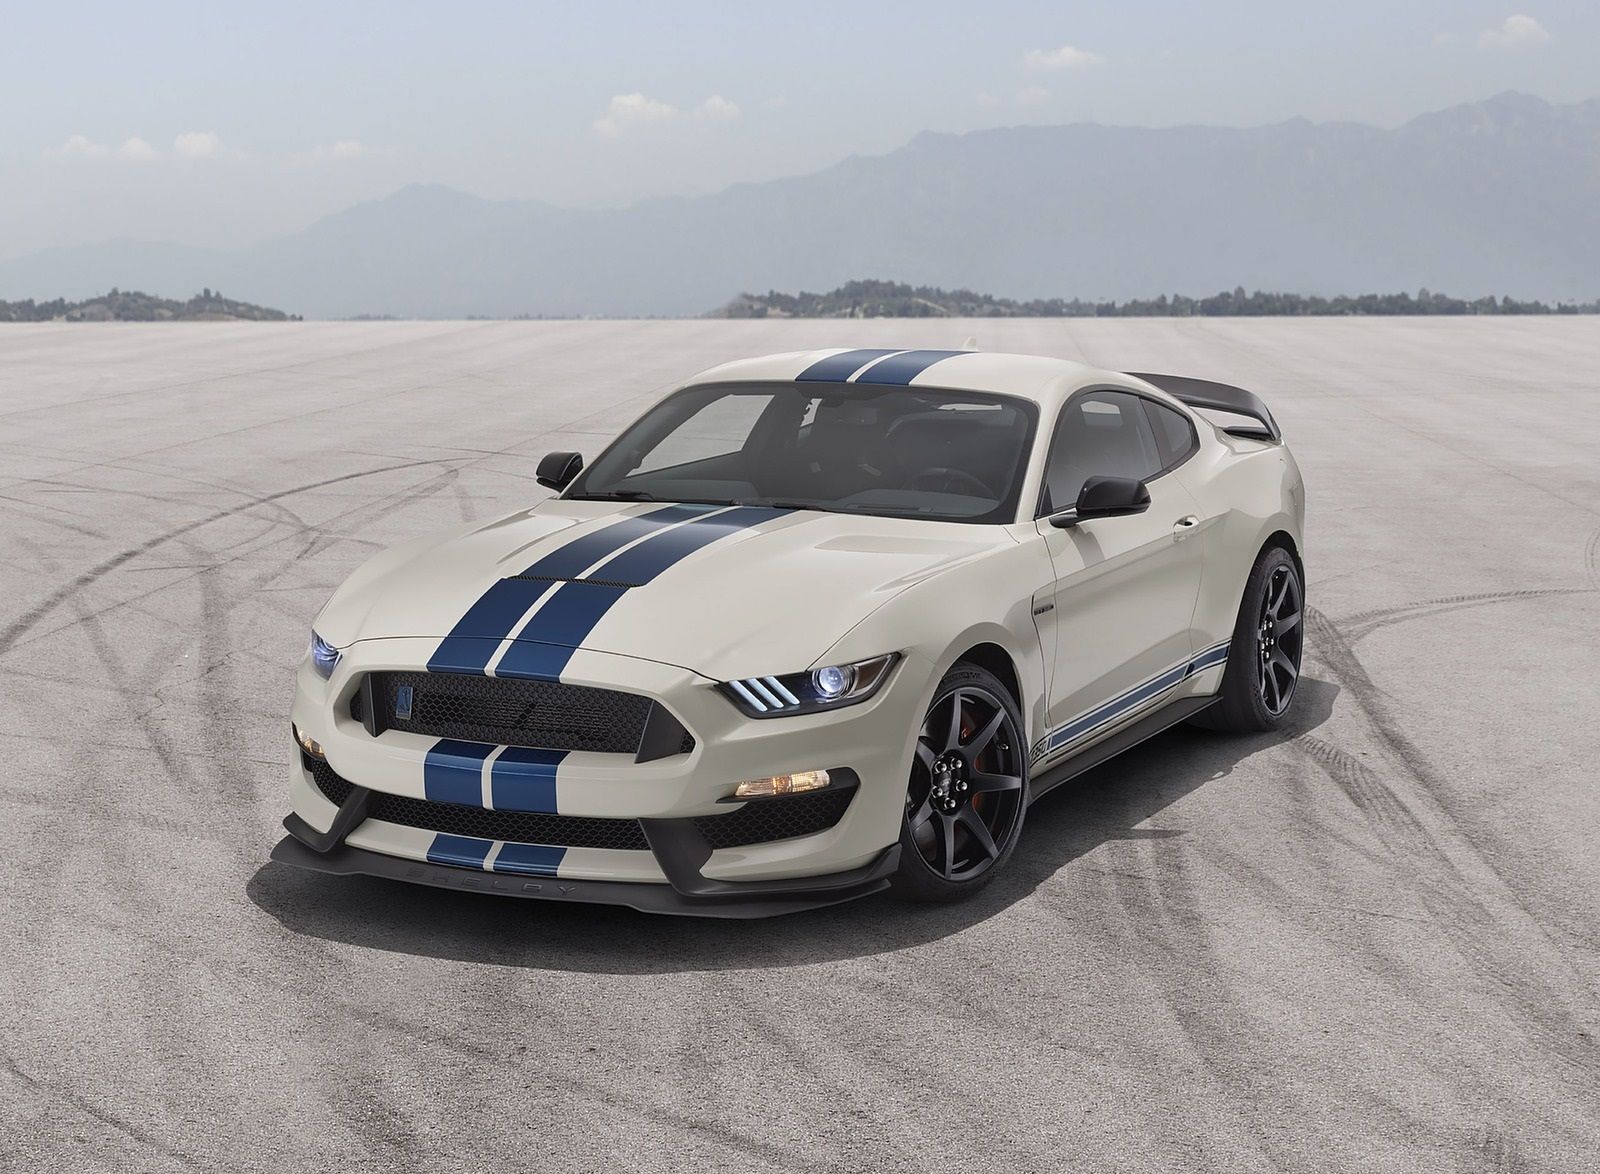 Ford Mustang Shelby GT350 Wallpaper (HD Image)